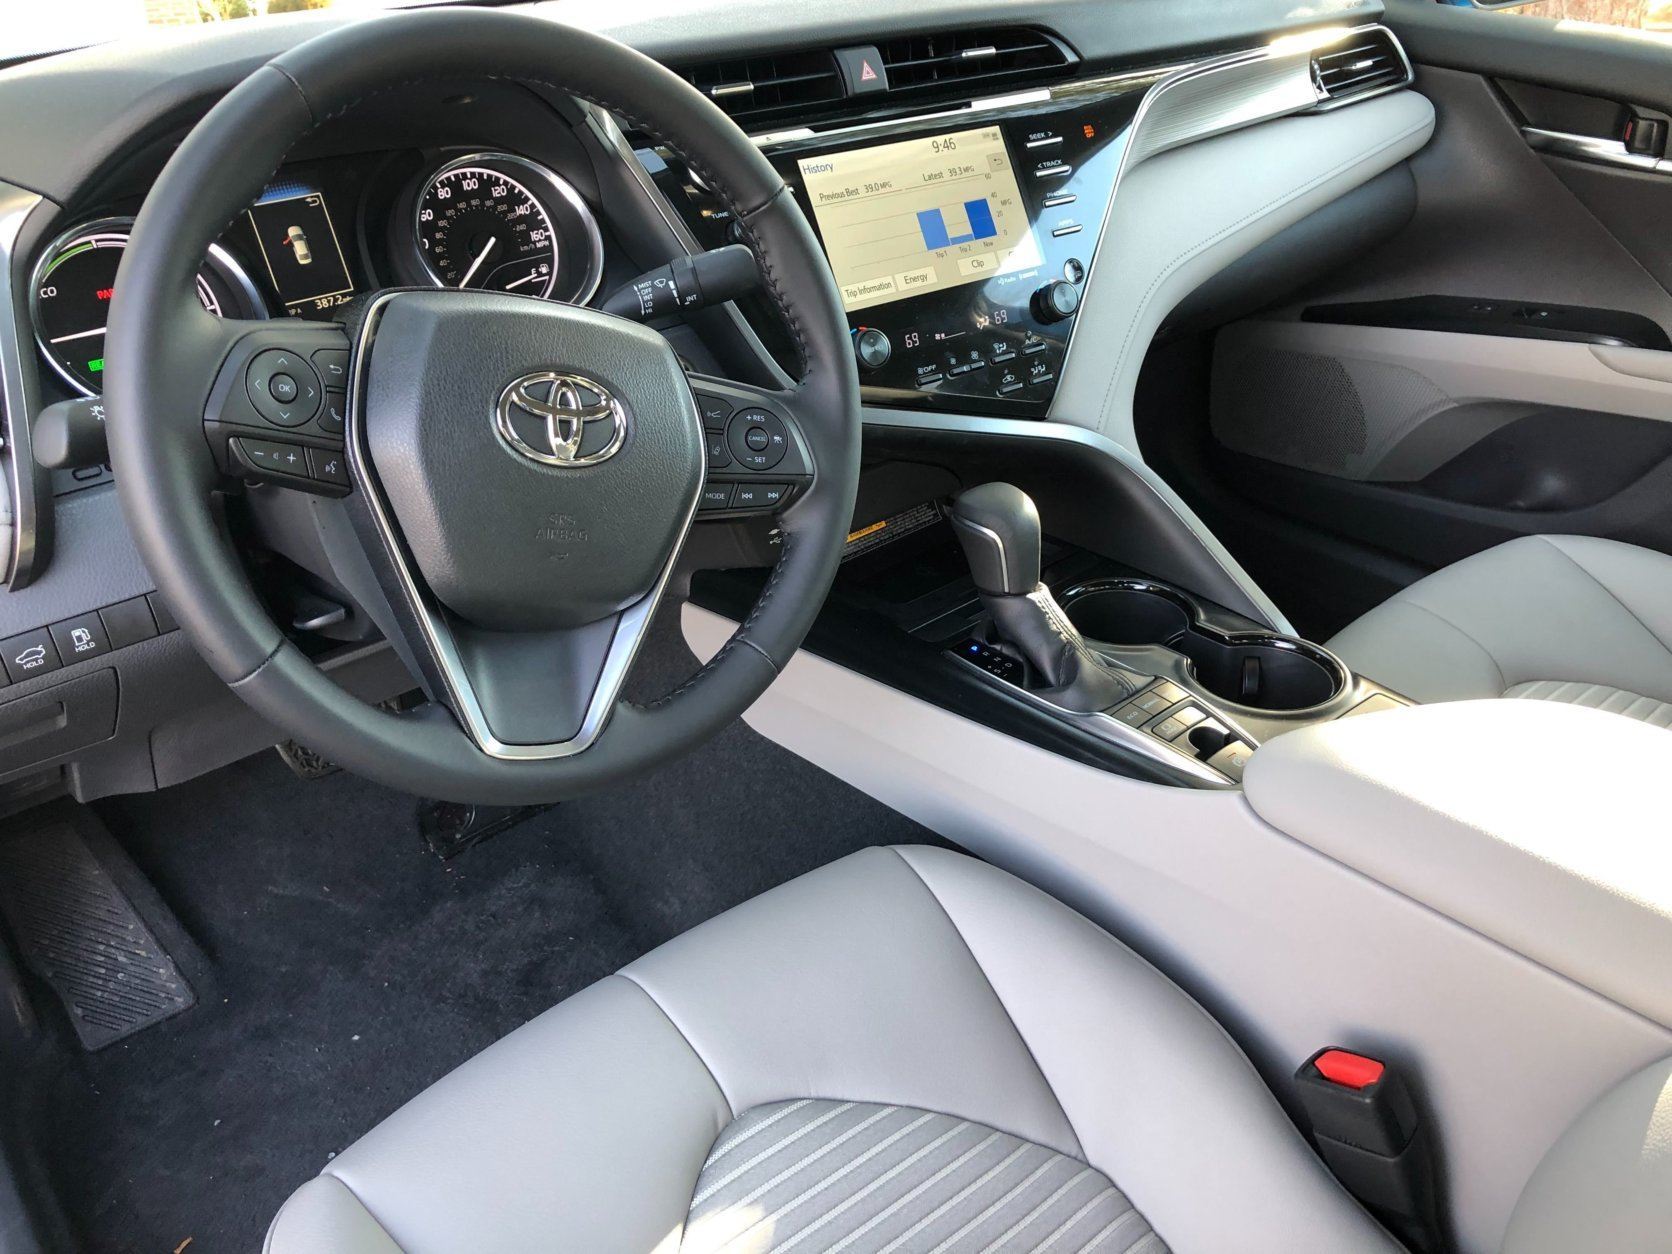 Steering wheel and front seat of the 2019 Camry+